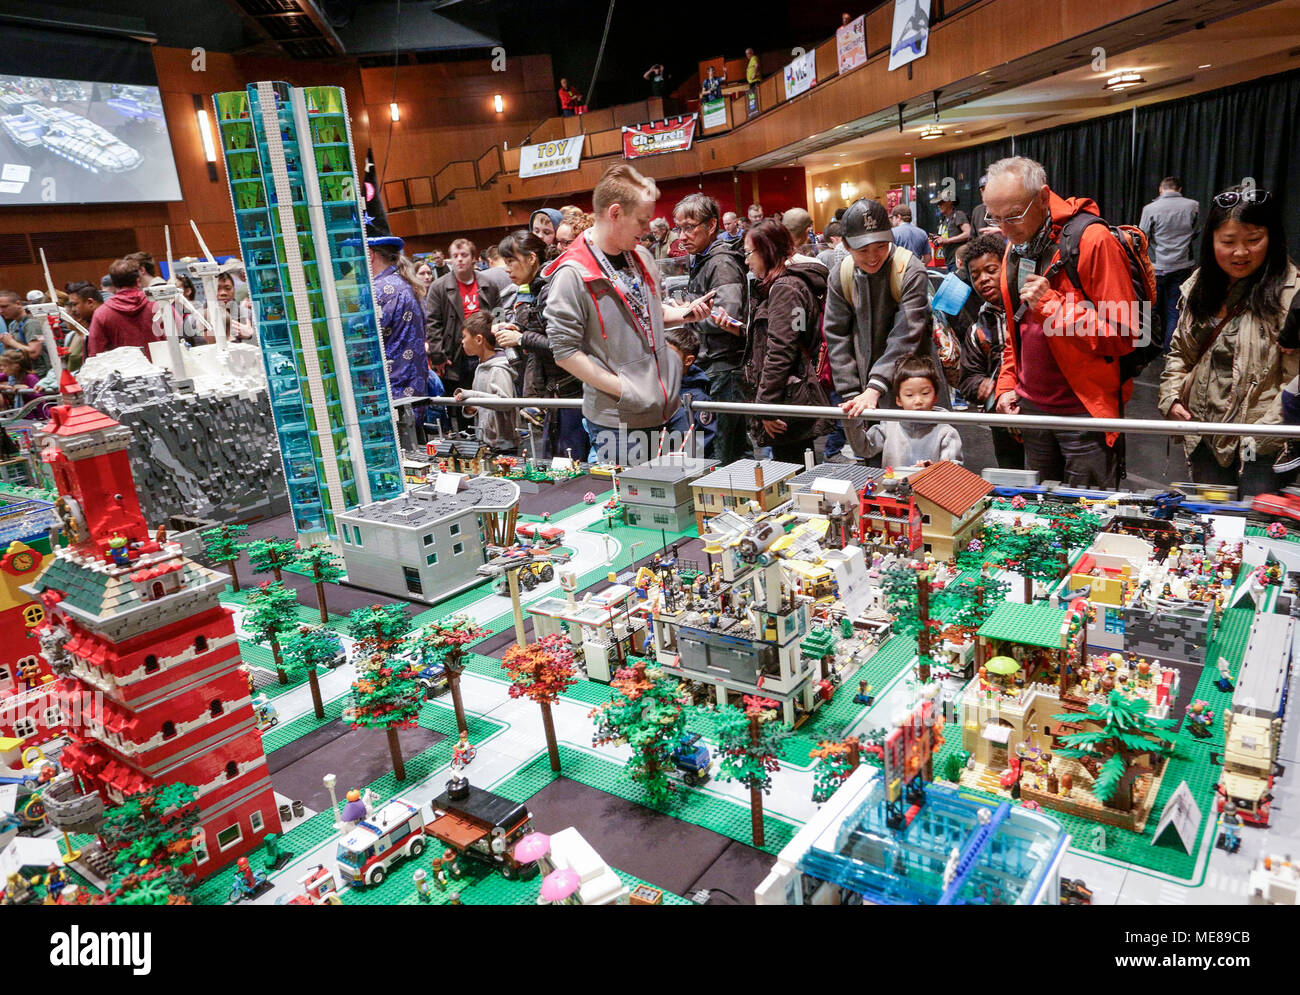 Lego Convention High Resolution Stock 